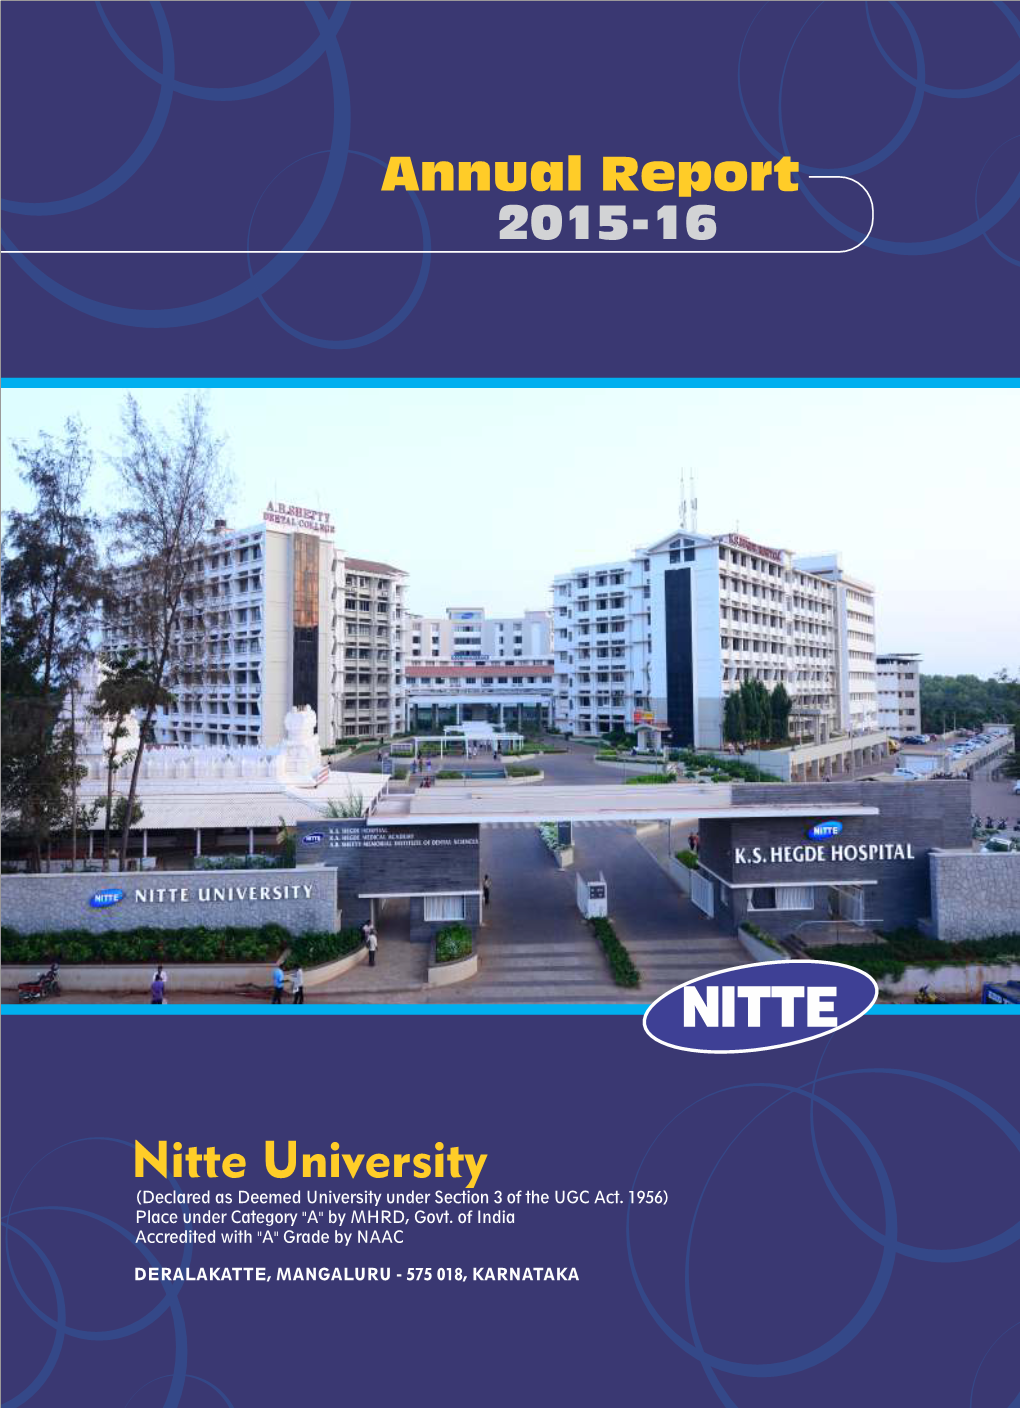 Nitte University (Declared As Deemed University Under Section 3 of the UGC Act